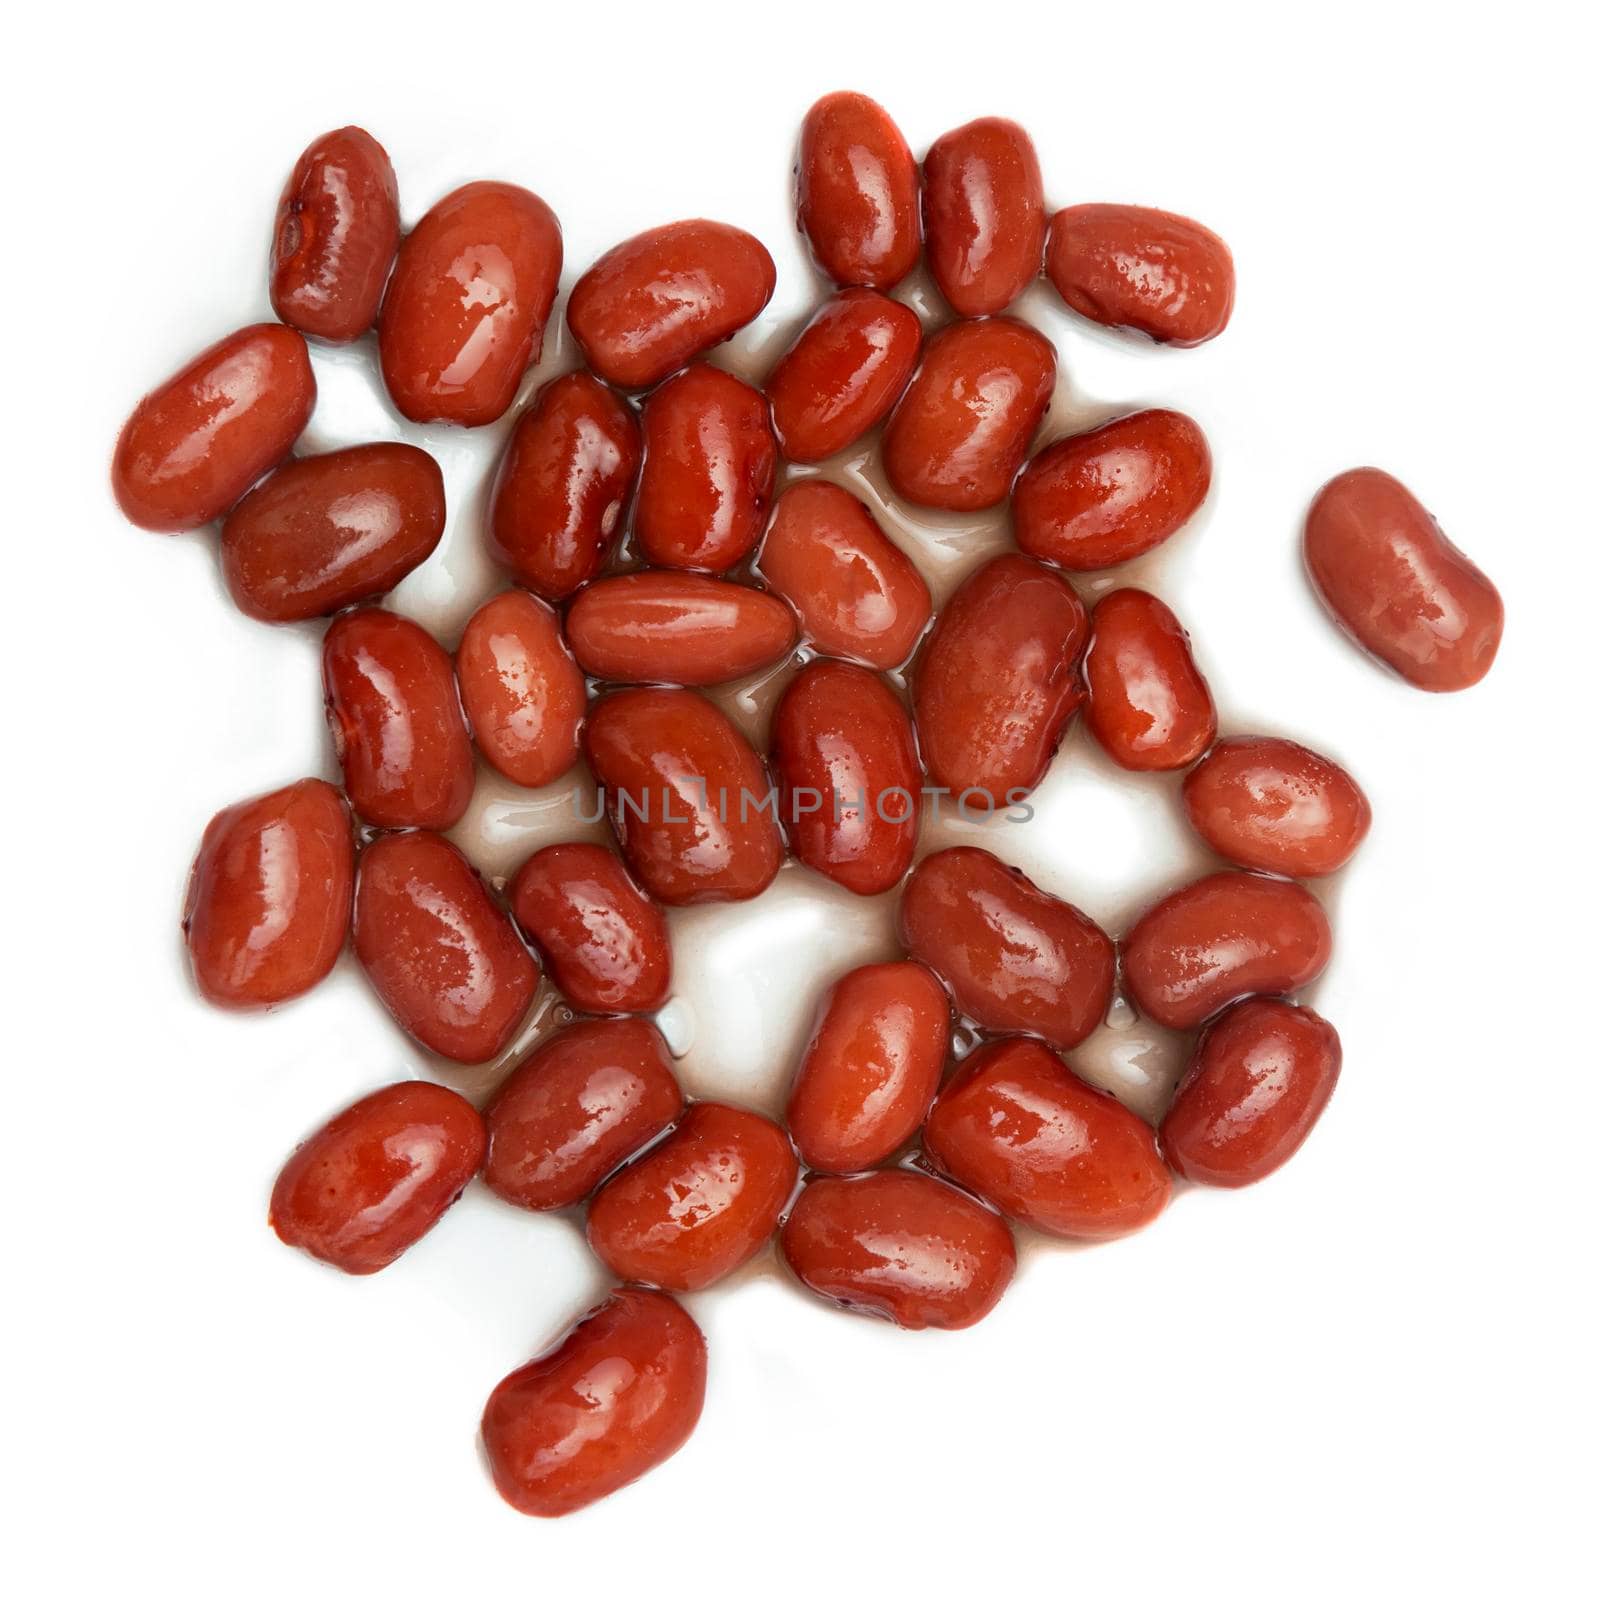 cooked kidney red beans closeup background by SlayCer